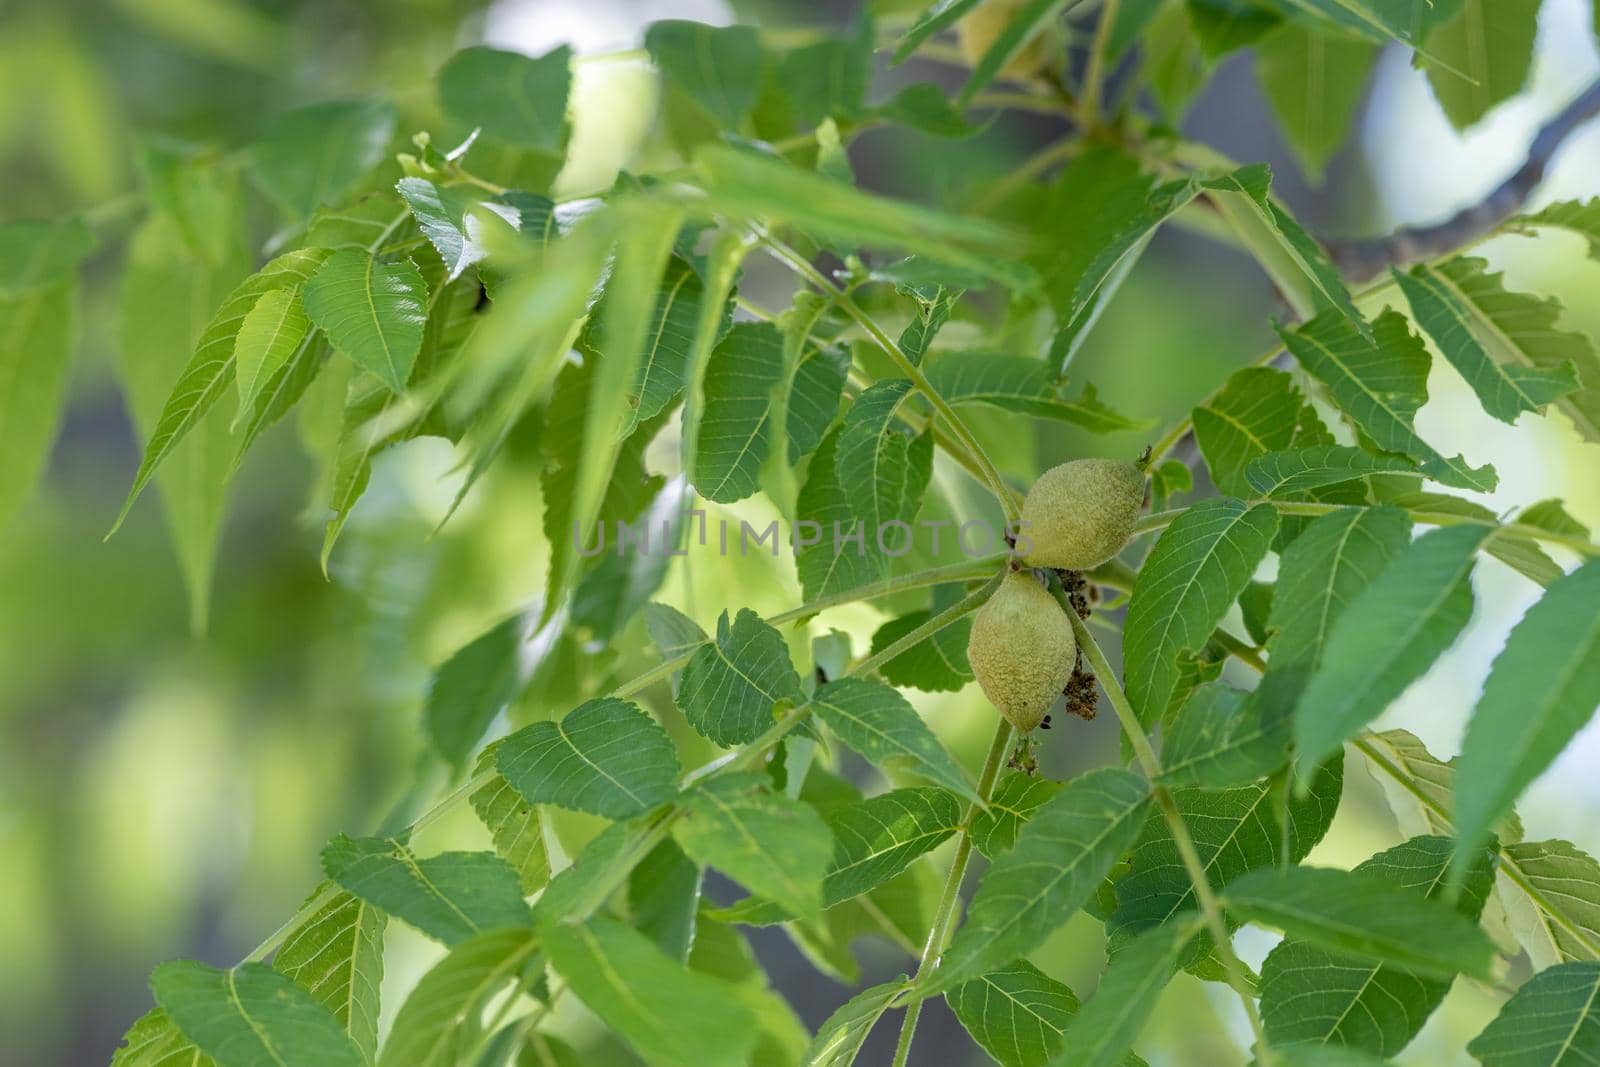 Black walnut tree fruit and leaves by colintemple